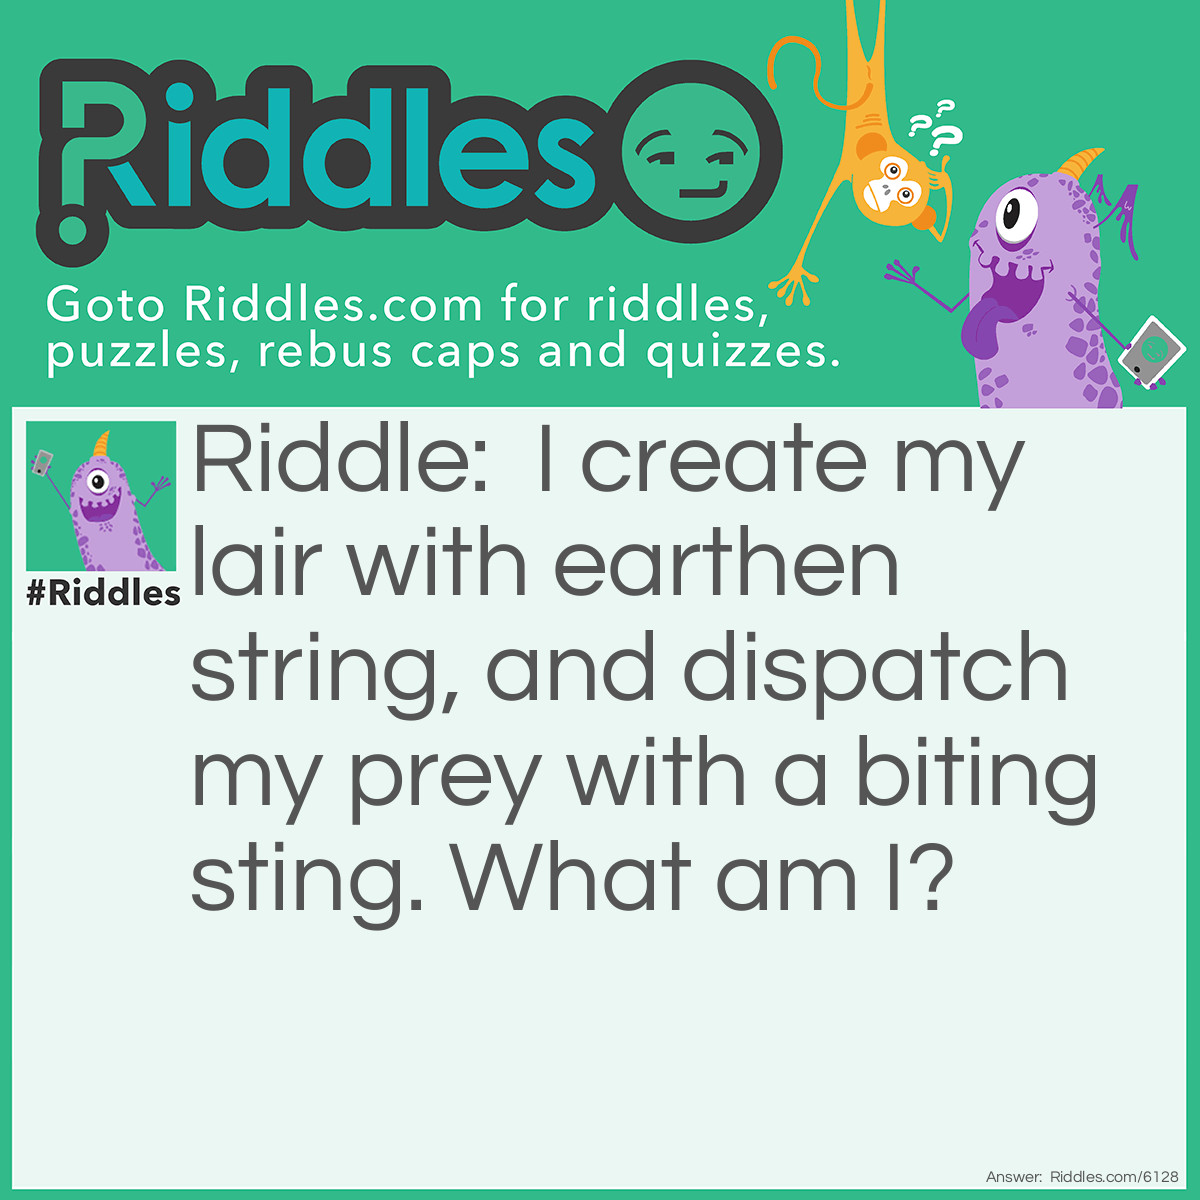 Riddle: I create my lair with earthen string, and dispatch my prey with a biting sting. What am I? Answer: A spider.